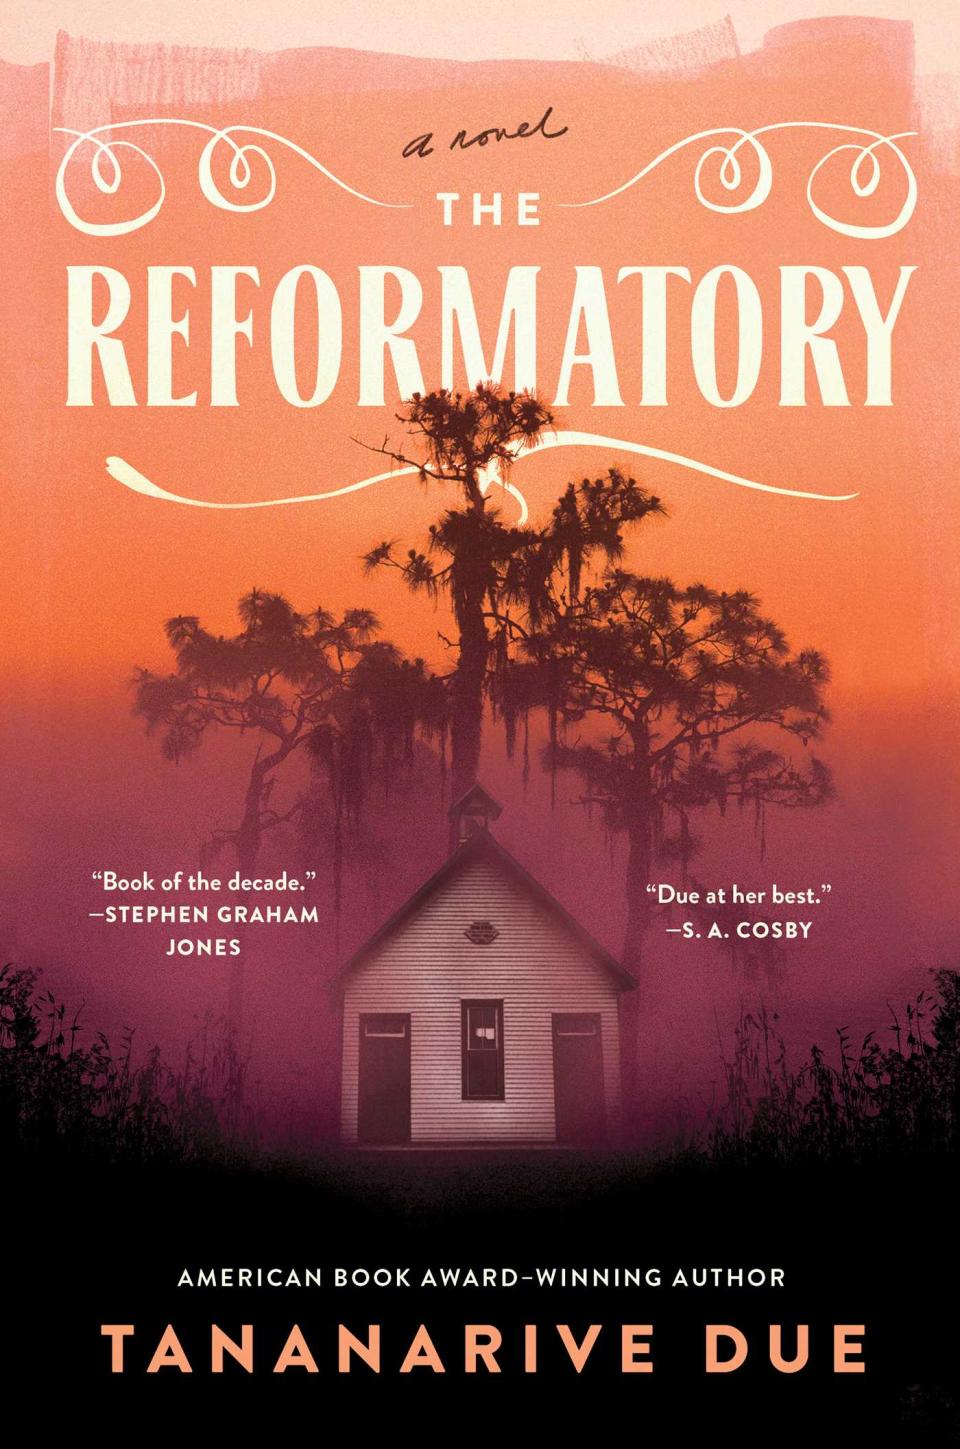 'The Reformatory' by Tananarive Due